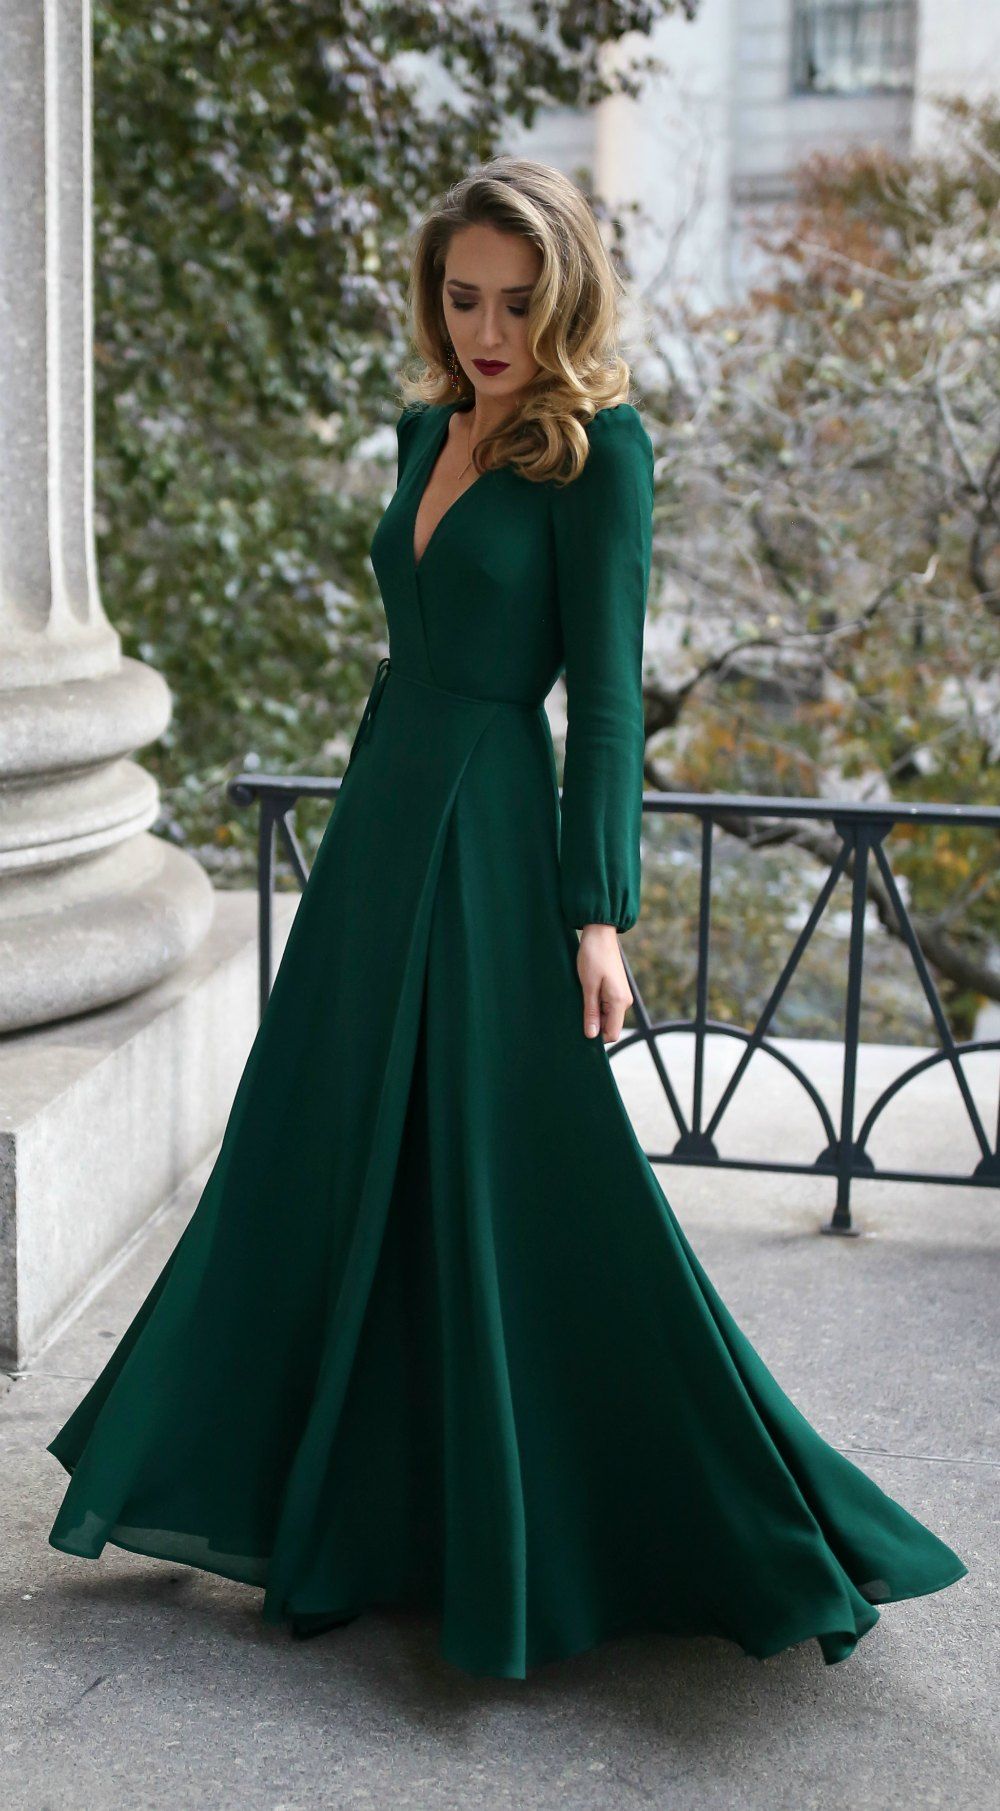 30 DRESSES IN 30 DAYS: Black Tie Wedding Guest // Emerald green  long-sleeved floor-length wrap dress, black and gold geometric pattern  evening clutch,